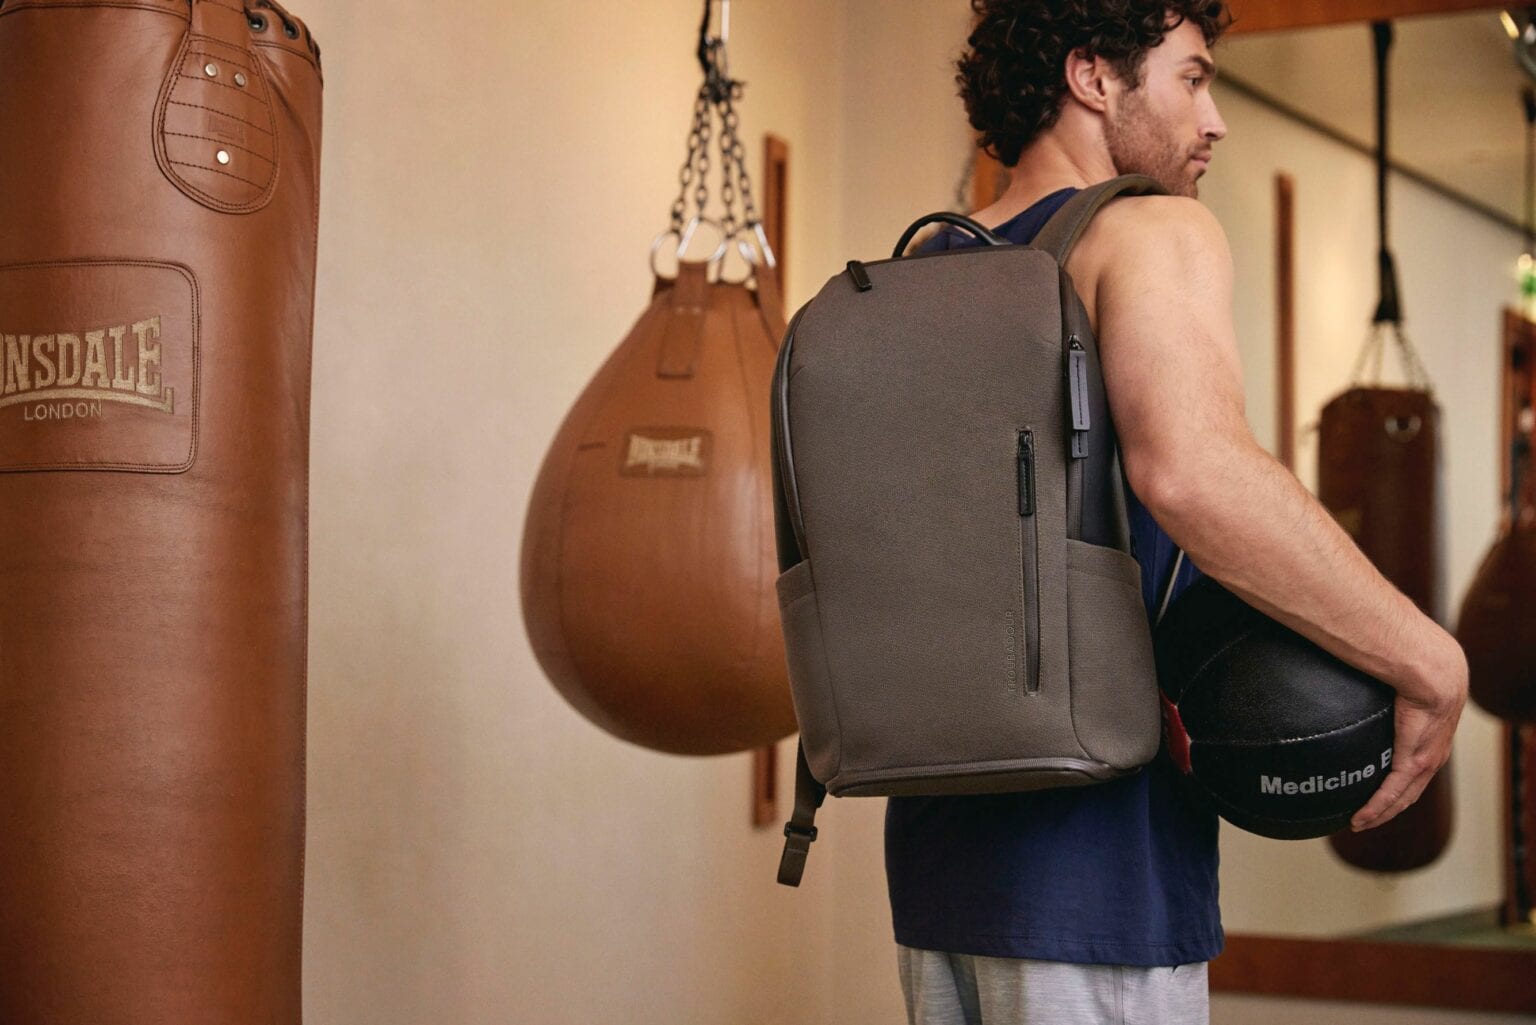 The Troubadour Pioneer won't look out of place at the gym or in the office.